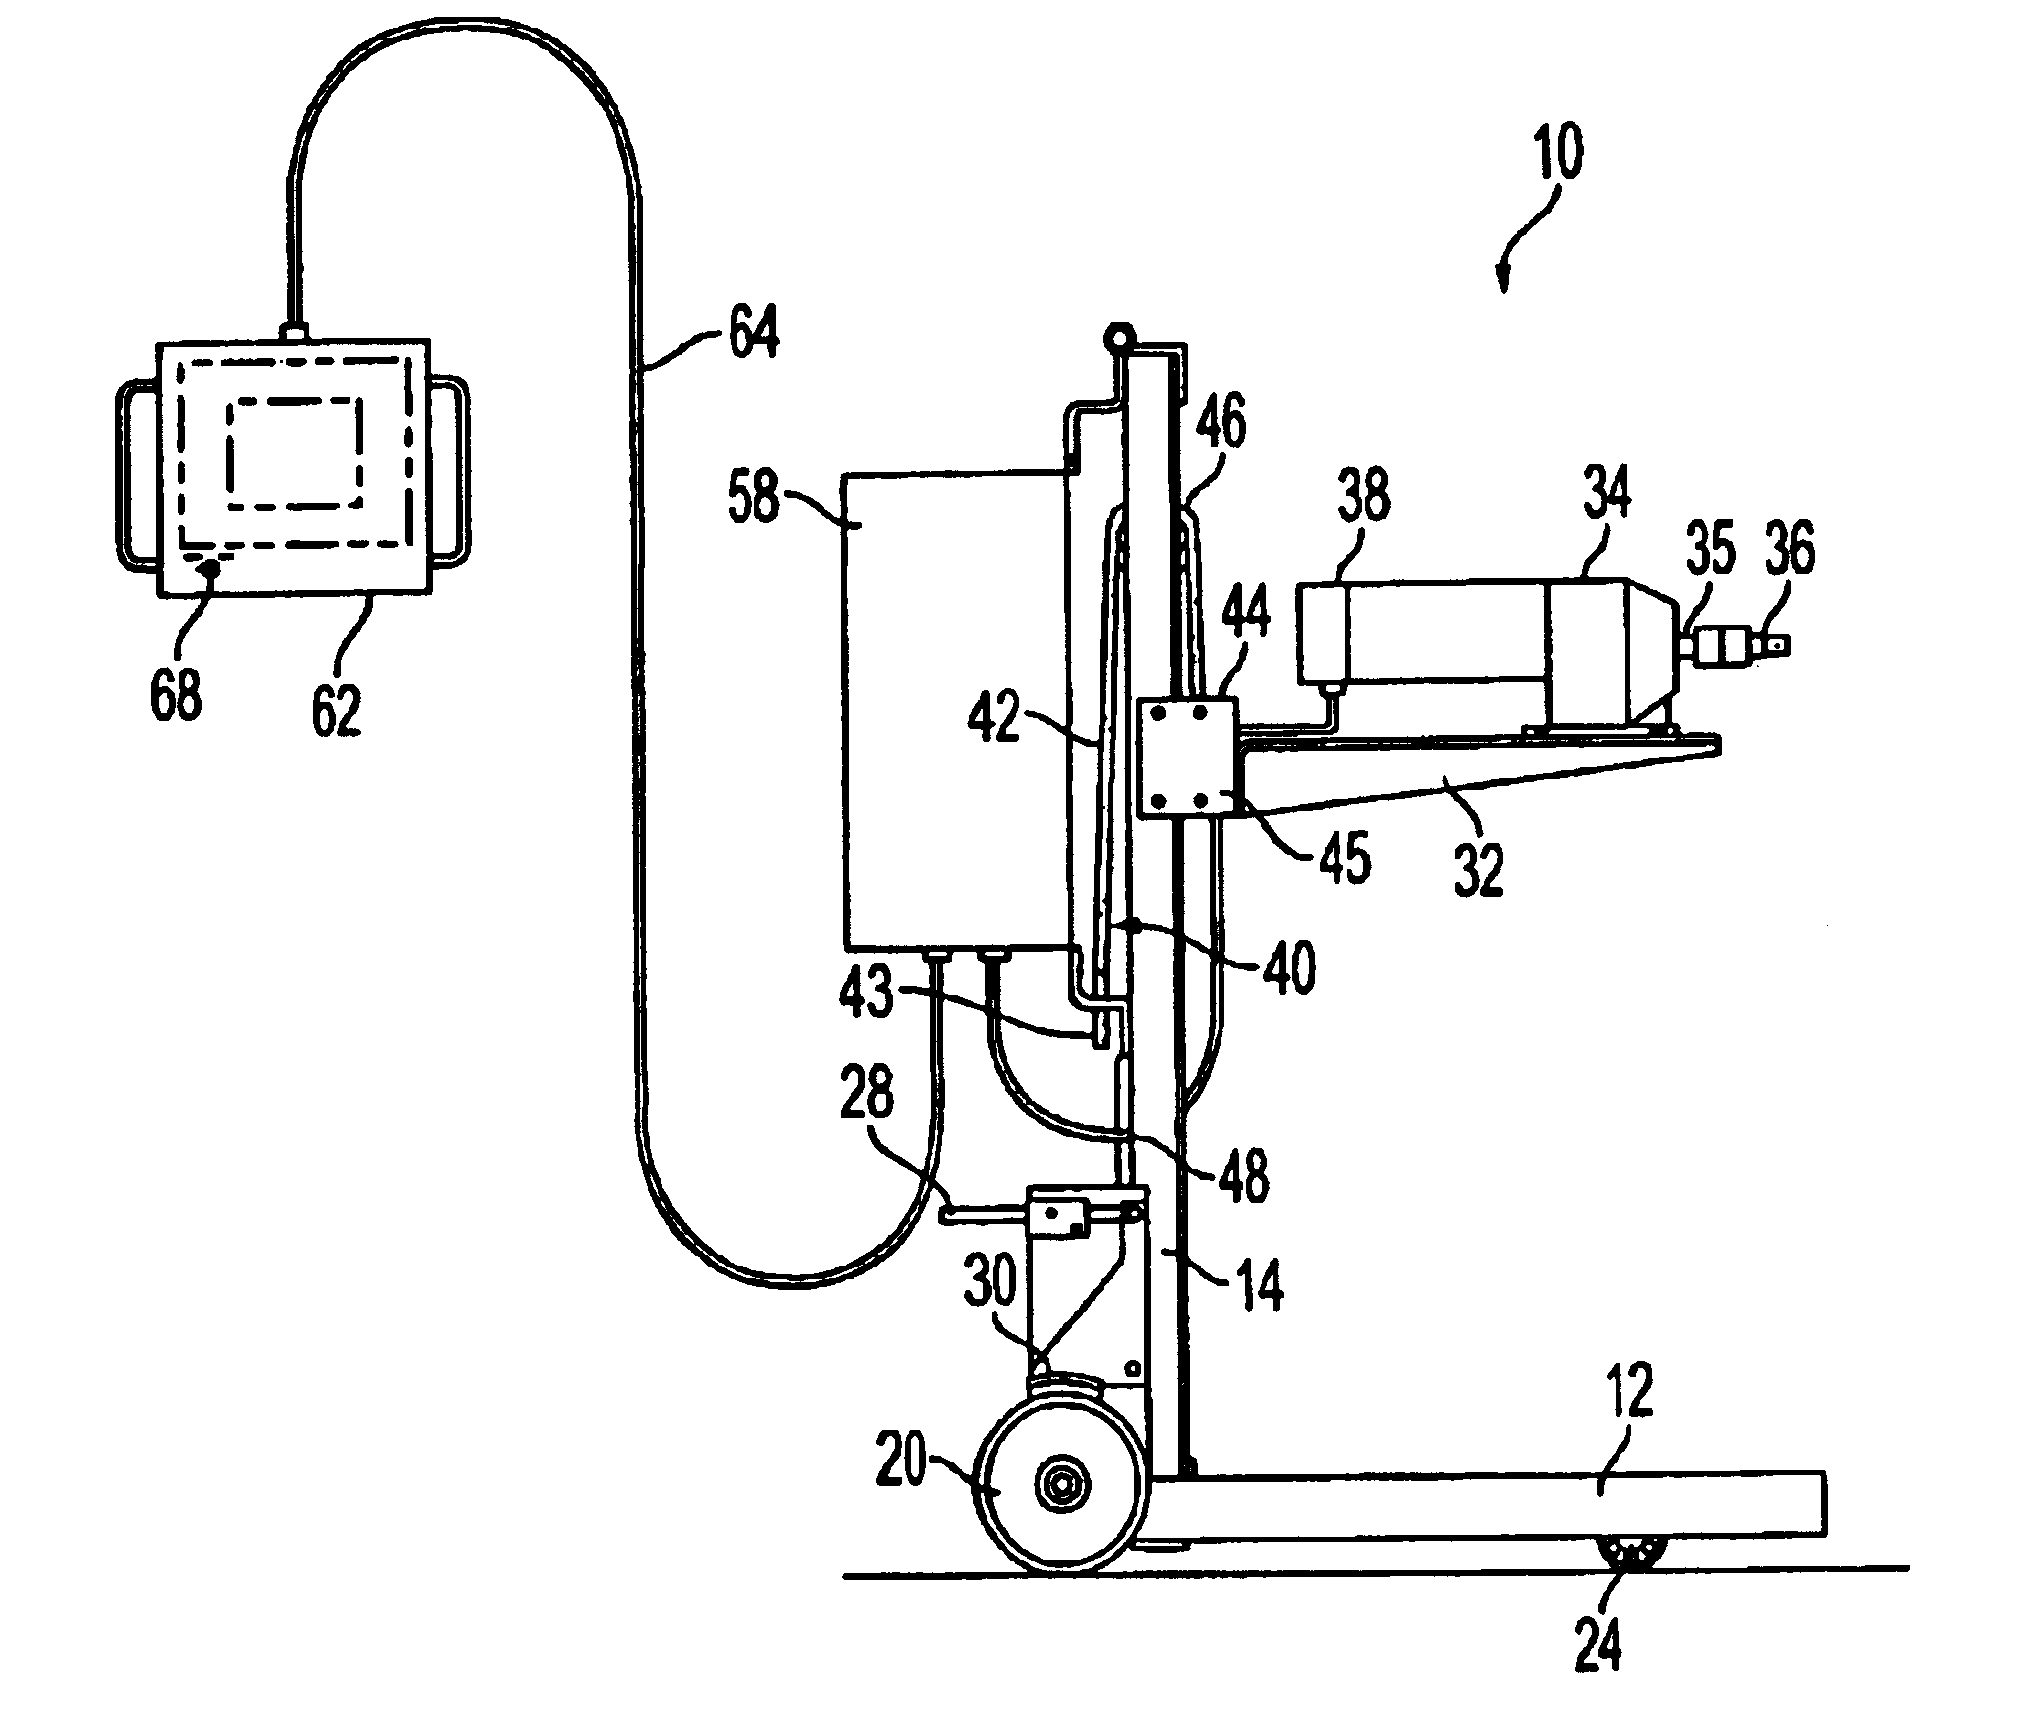 Apparatus and method for remotely moving a circuit breaker into or from a circuit breaker cell housing